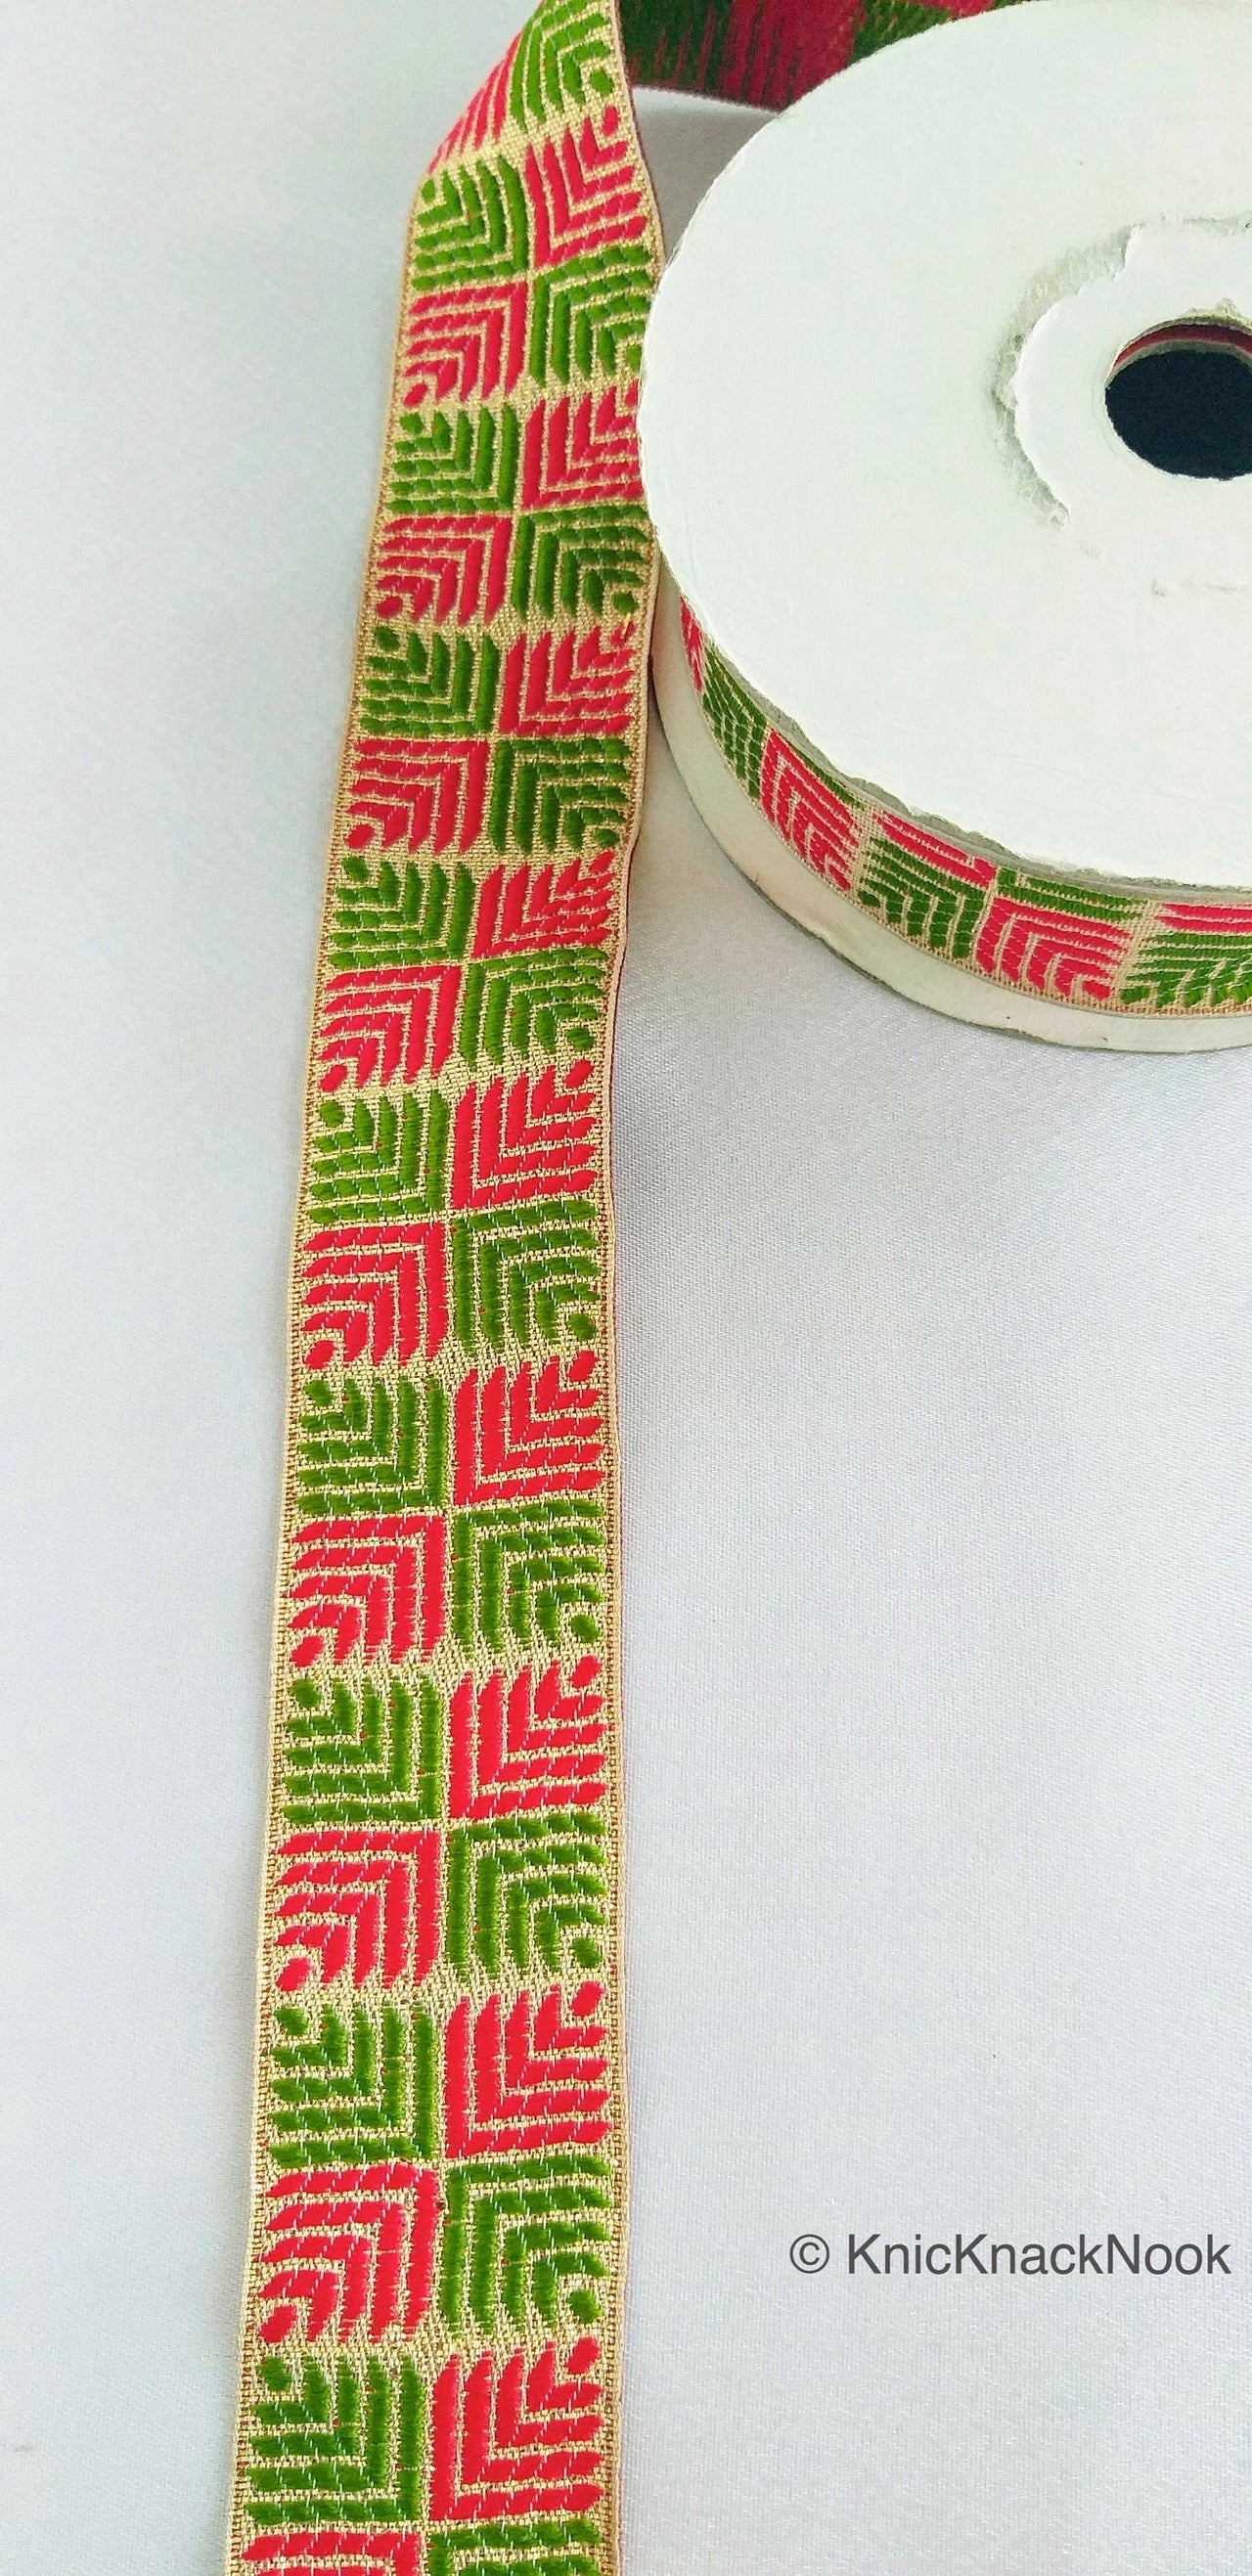 Red And Green Jacquard Trim, Approx 34mm Wide, Decorative Trim